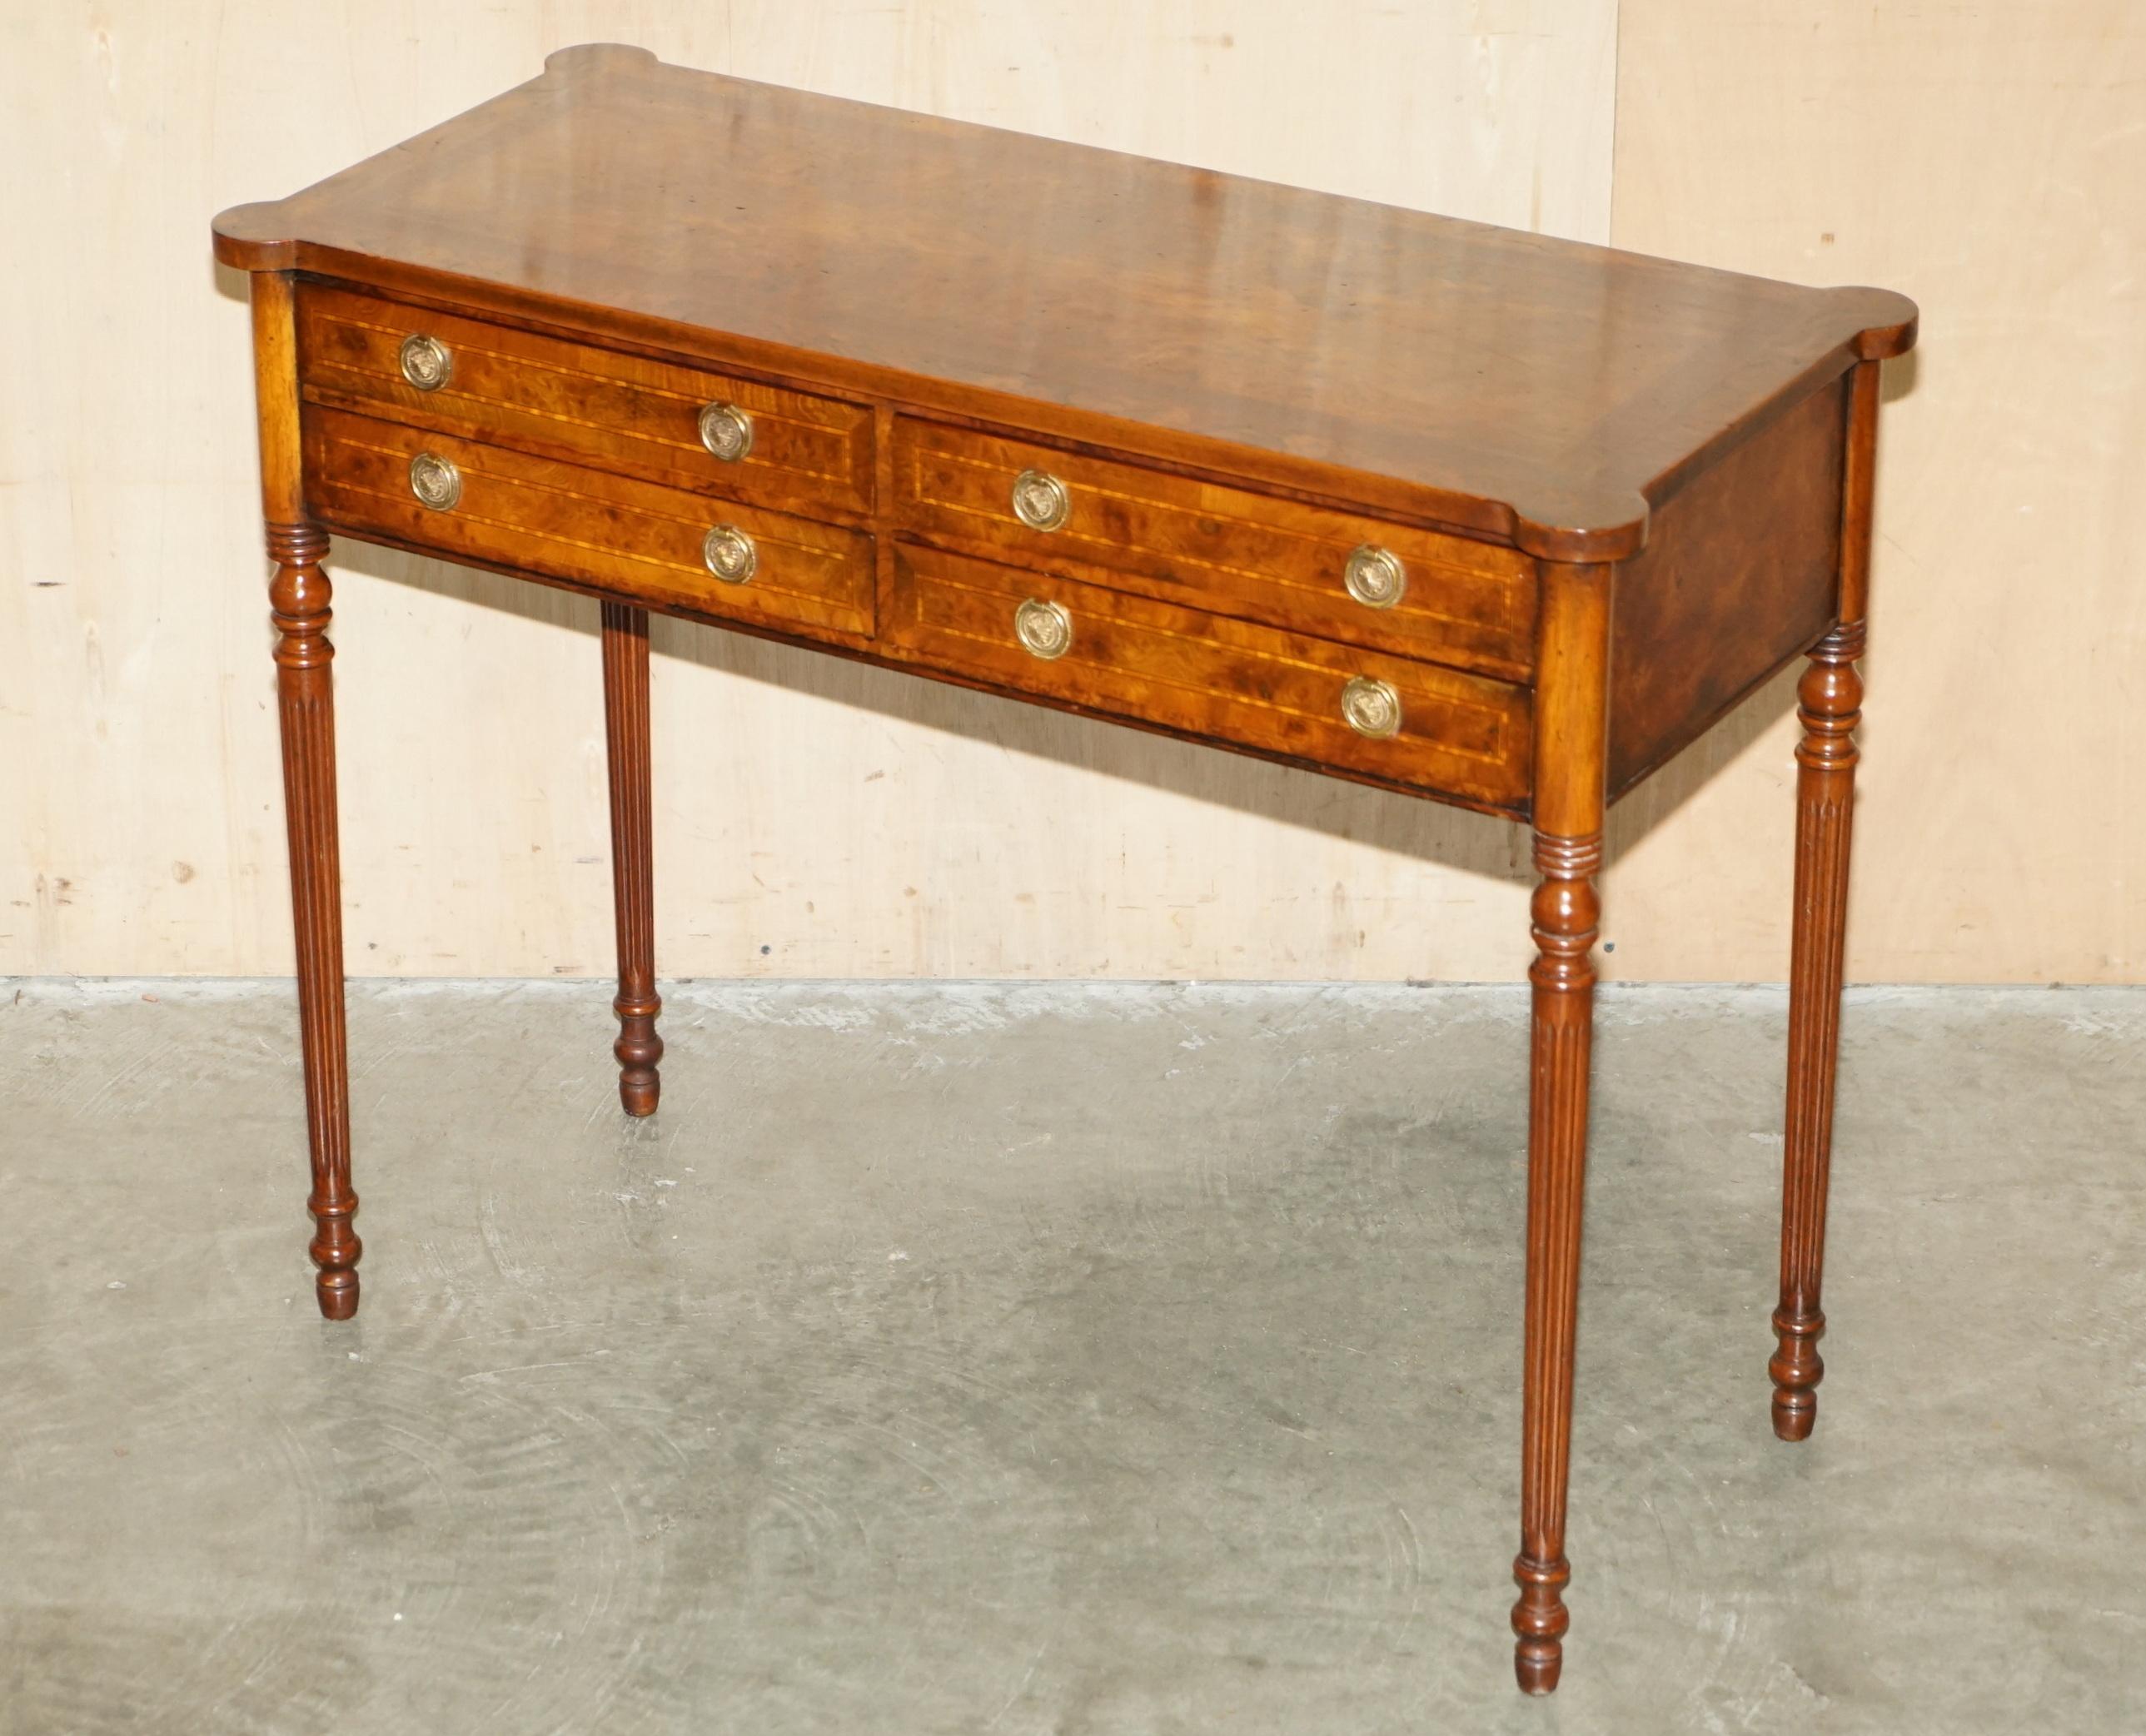 Royal House Antiques

Royal House Antiques is delighted to offer for sale this absolutely lovely fully restored Burr Elm & Satinwood console table with four drawers on turned fluted legs that has been French Polished 

Please note the delivery fee